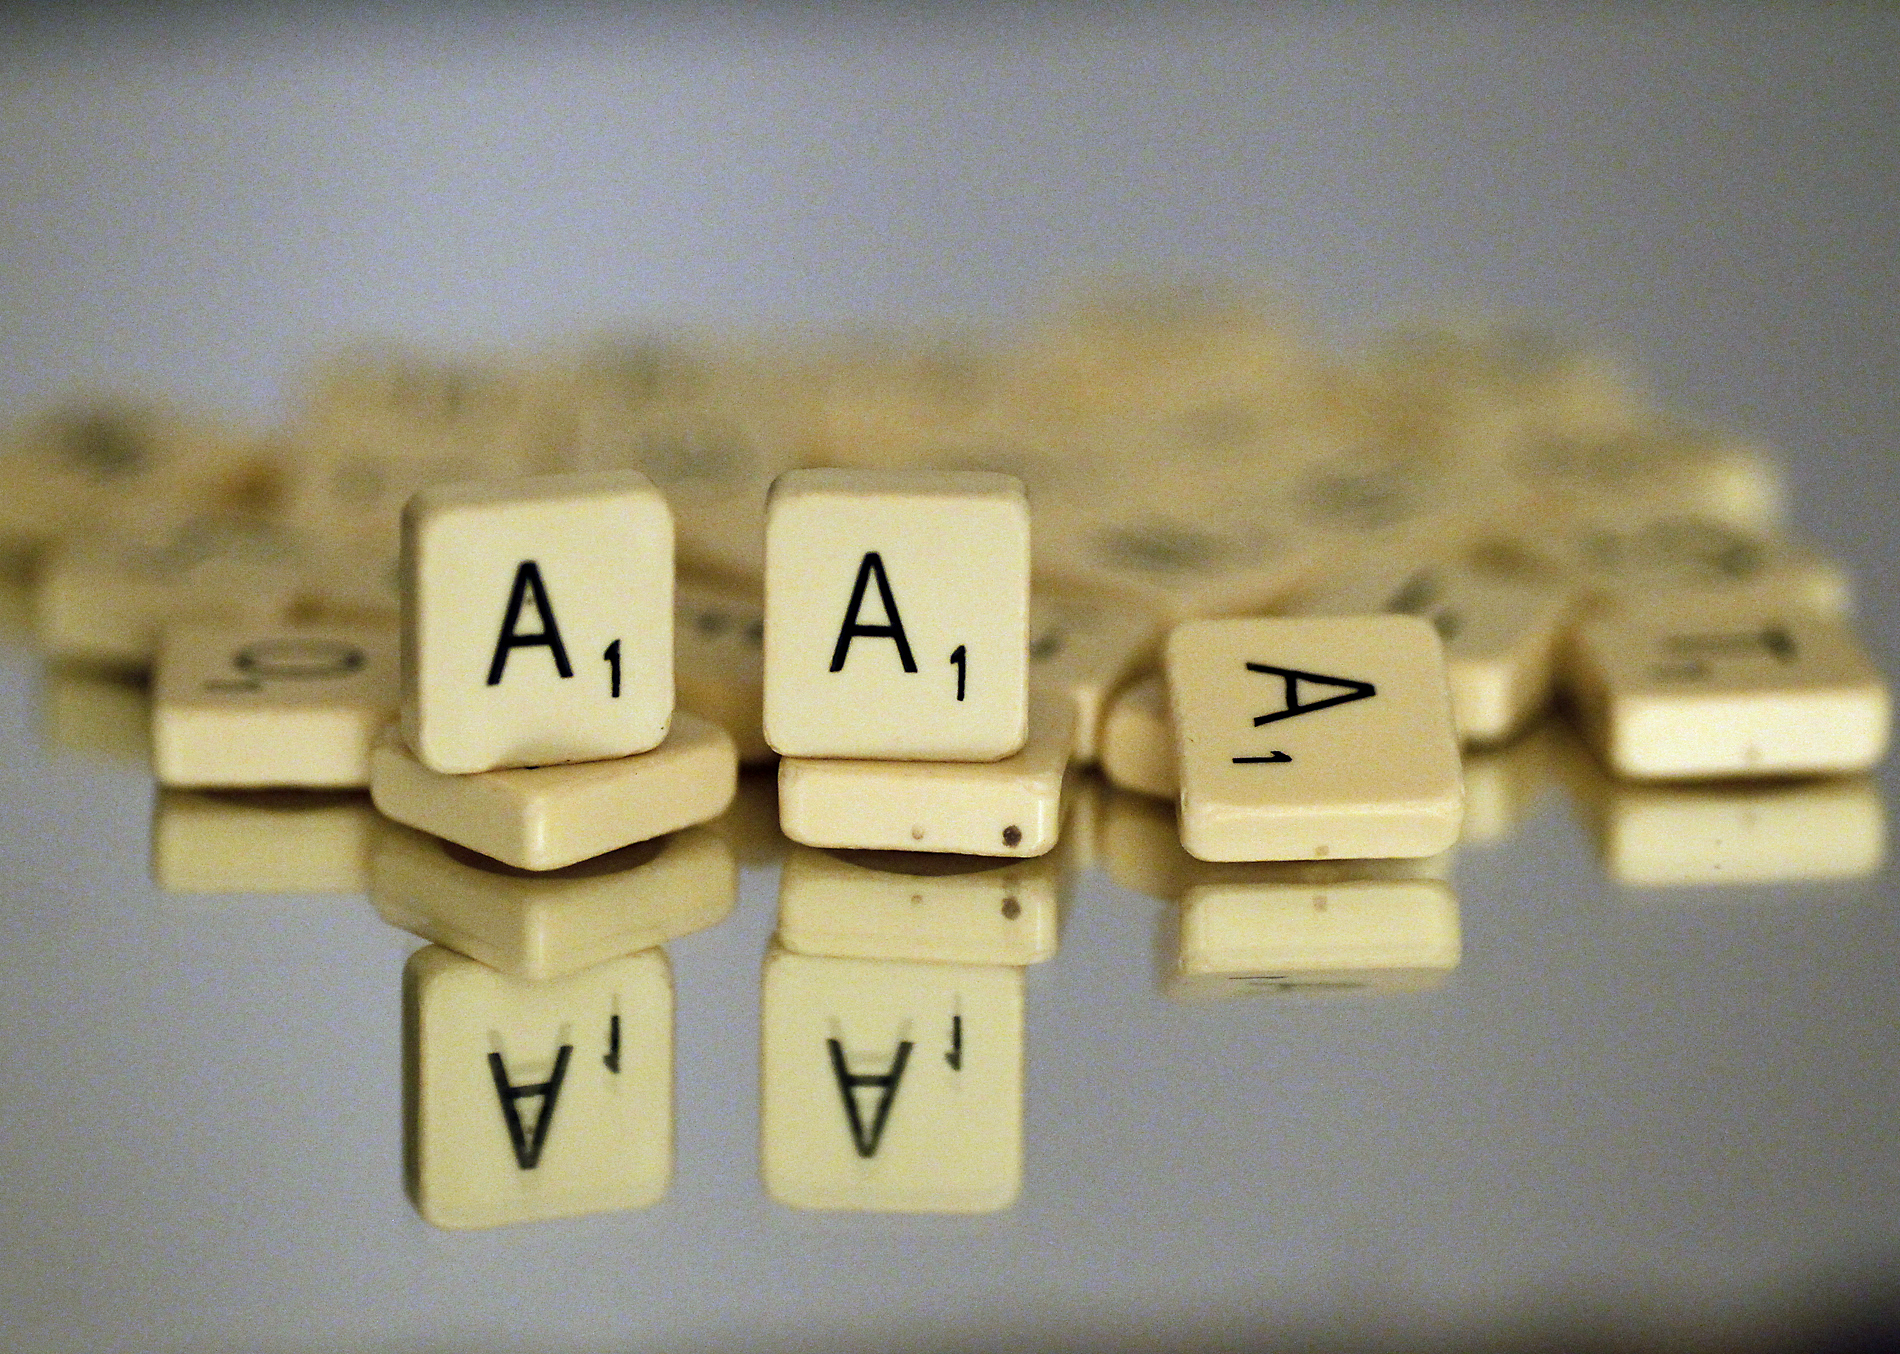 Scrabble "A" lettered tiles are displaye